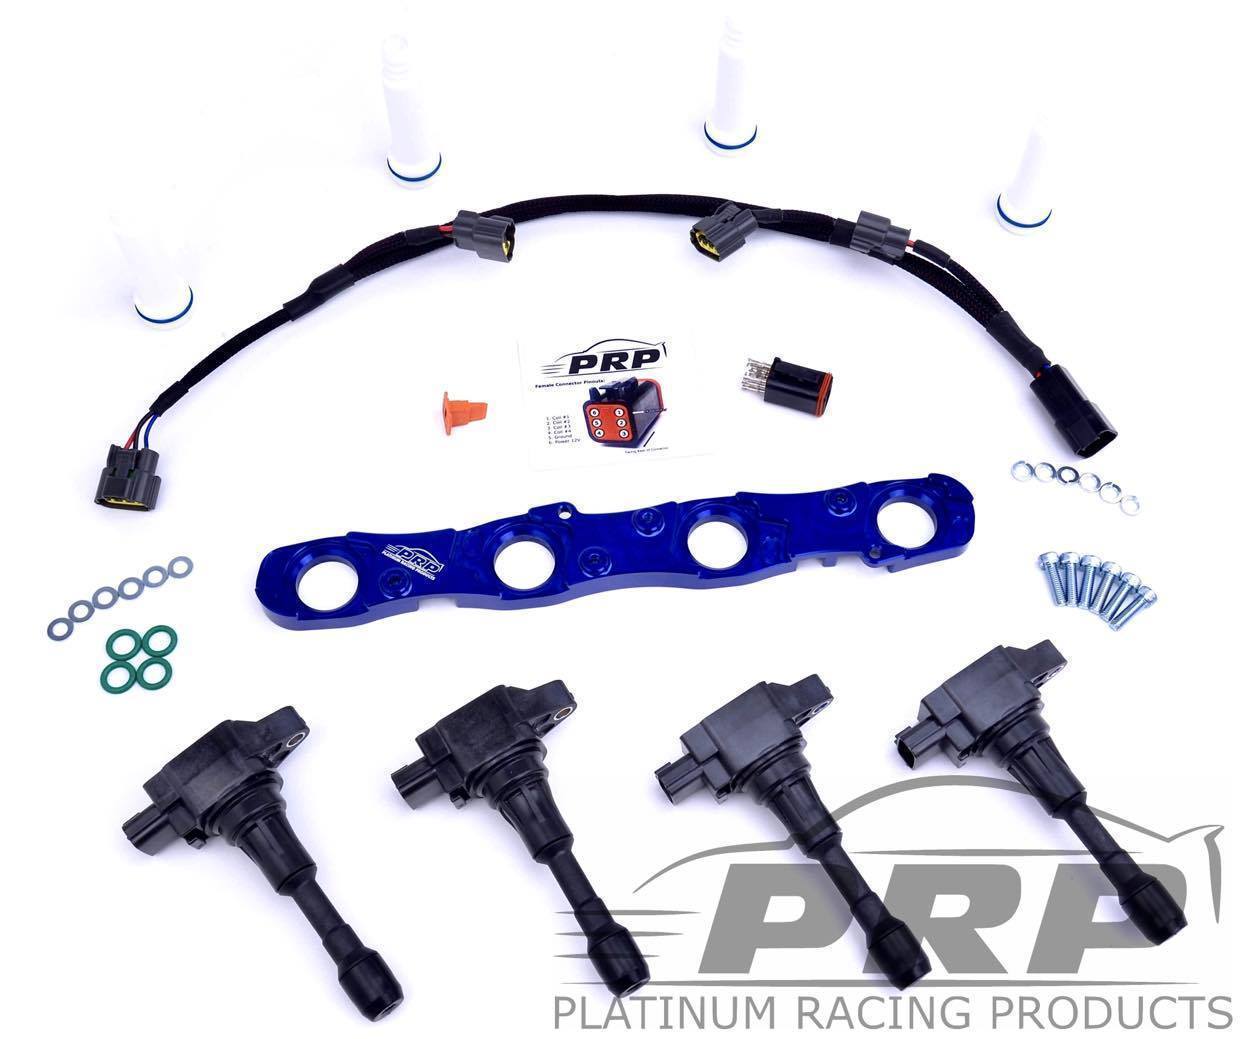 PLATINUM RACING PRODUCTS - EVO 4 - 9 VR38 SEQUENTIAL COIL KIT OPTIONS